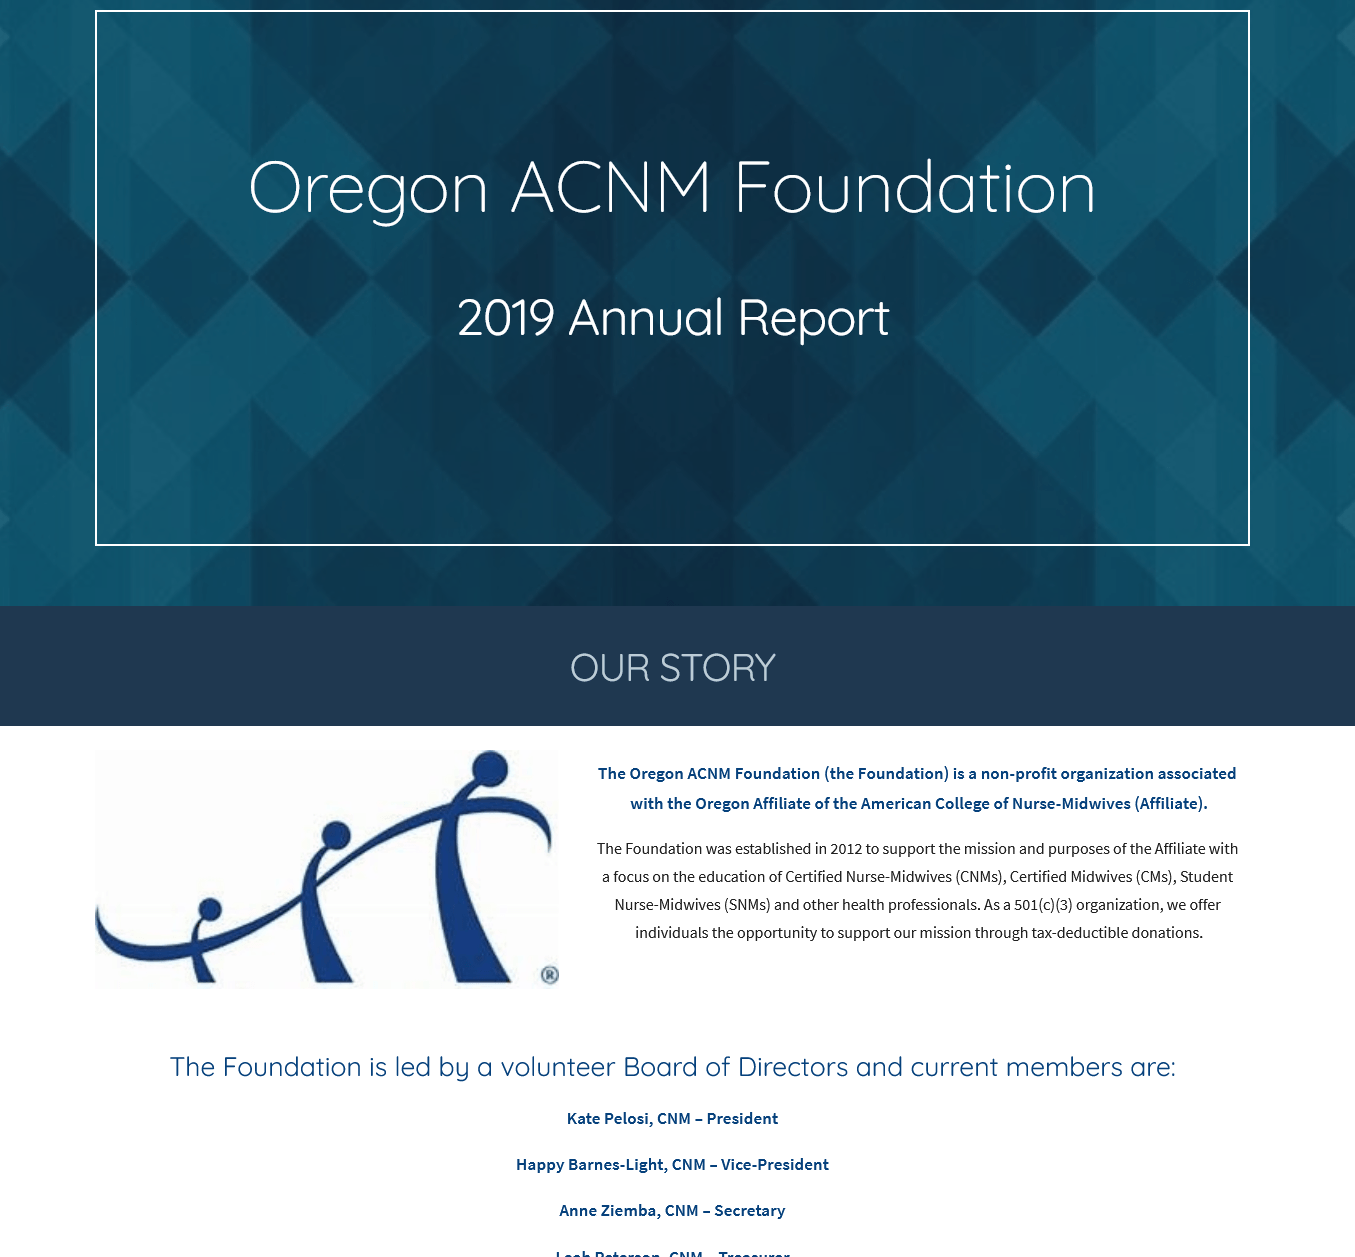 Cover image for the 2019 Oregon ACNM Foundation Annual Report